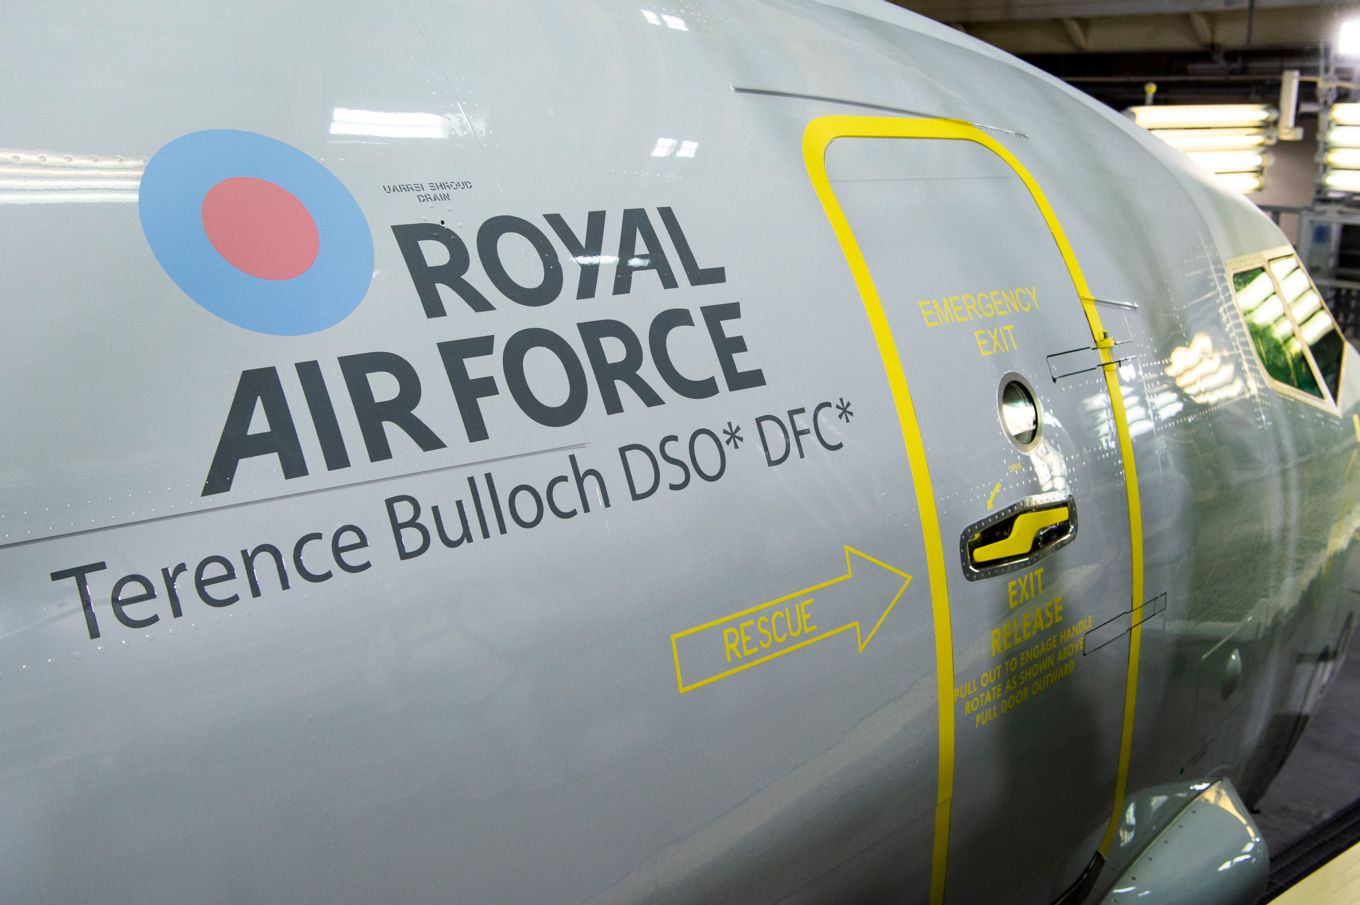 ZP803 was named after Terry Bulloch, a legend in the RAF Maritime Patrol community. 